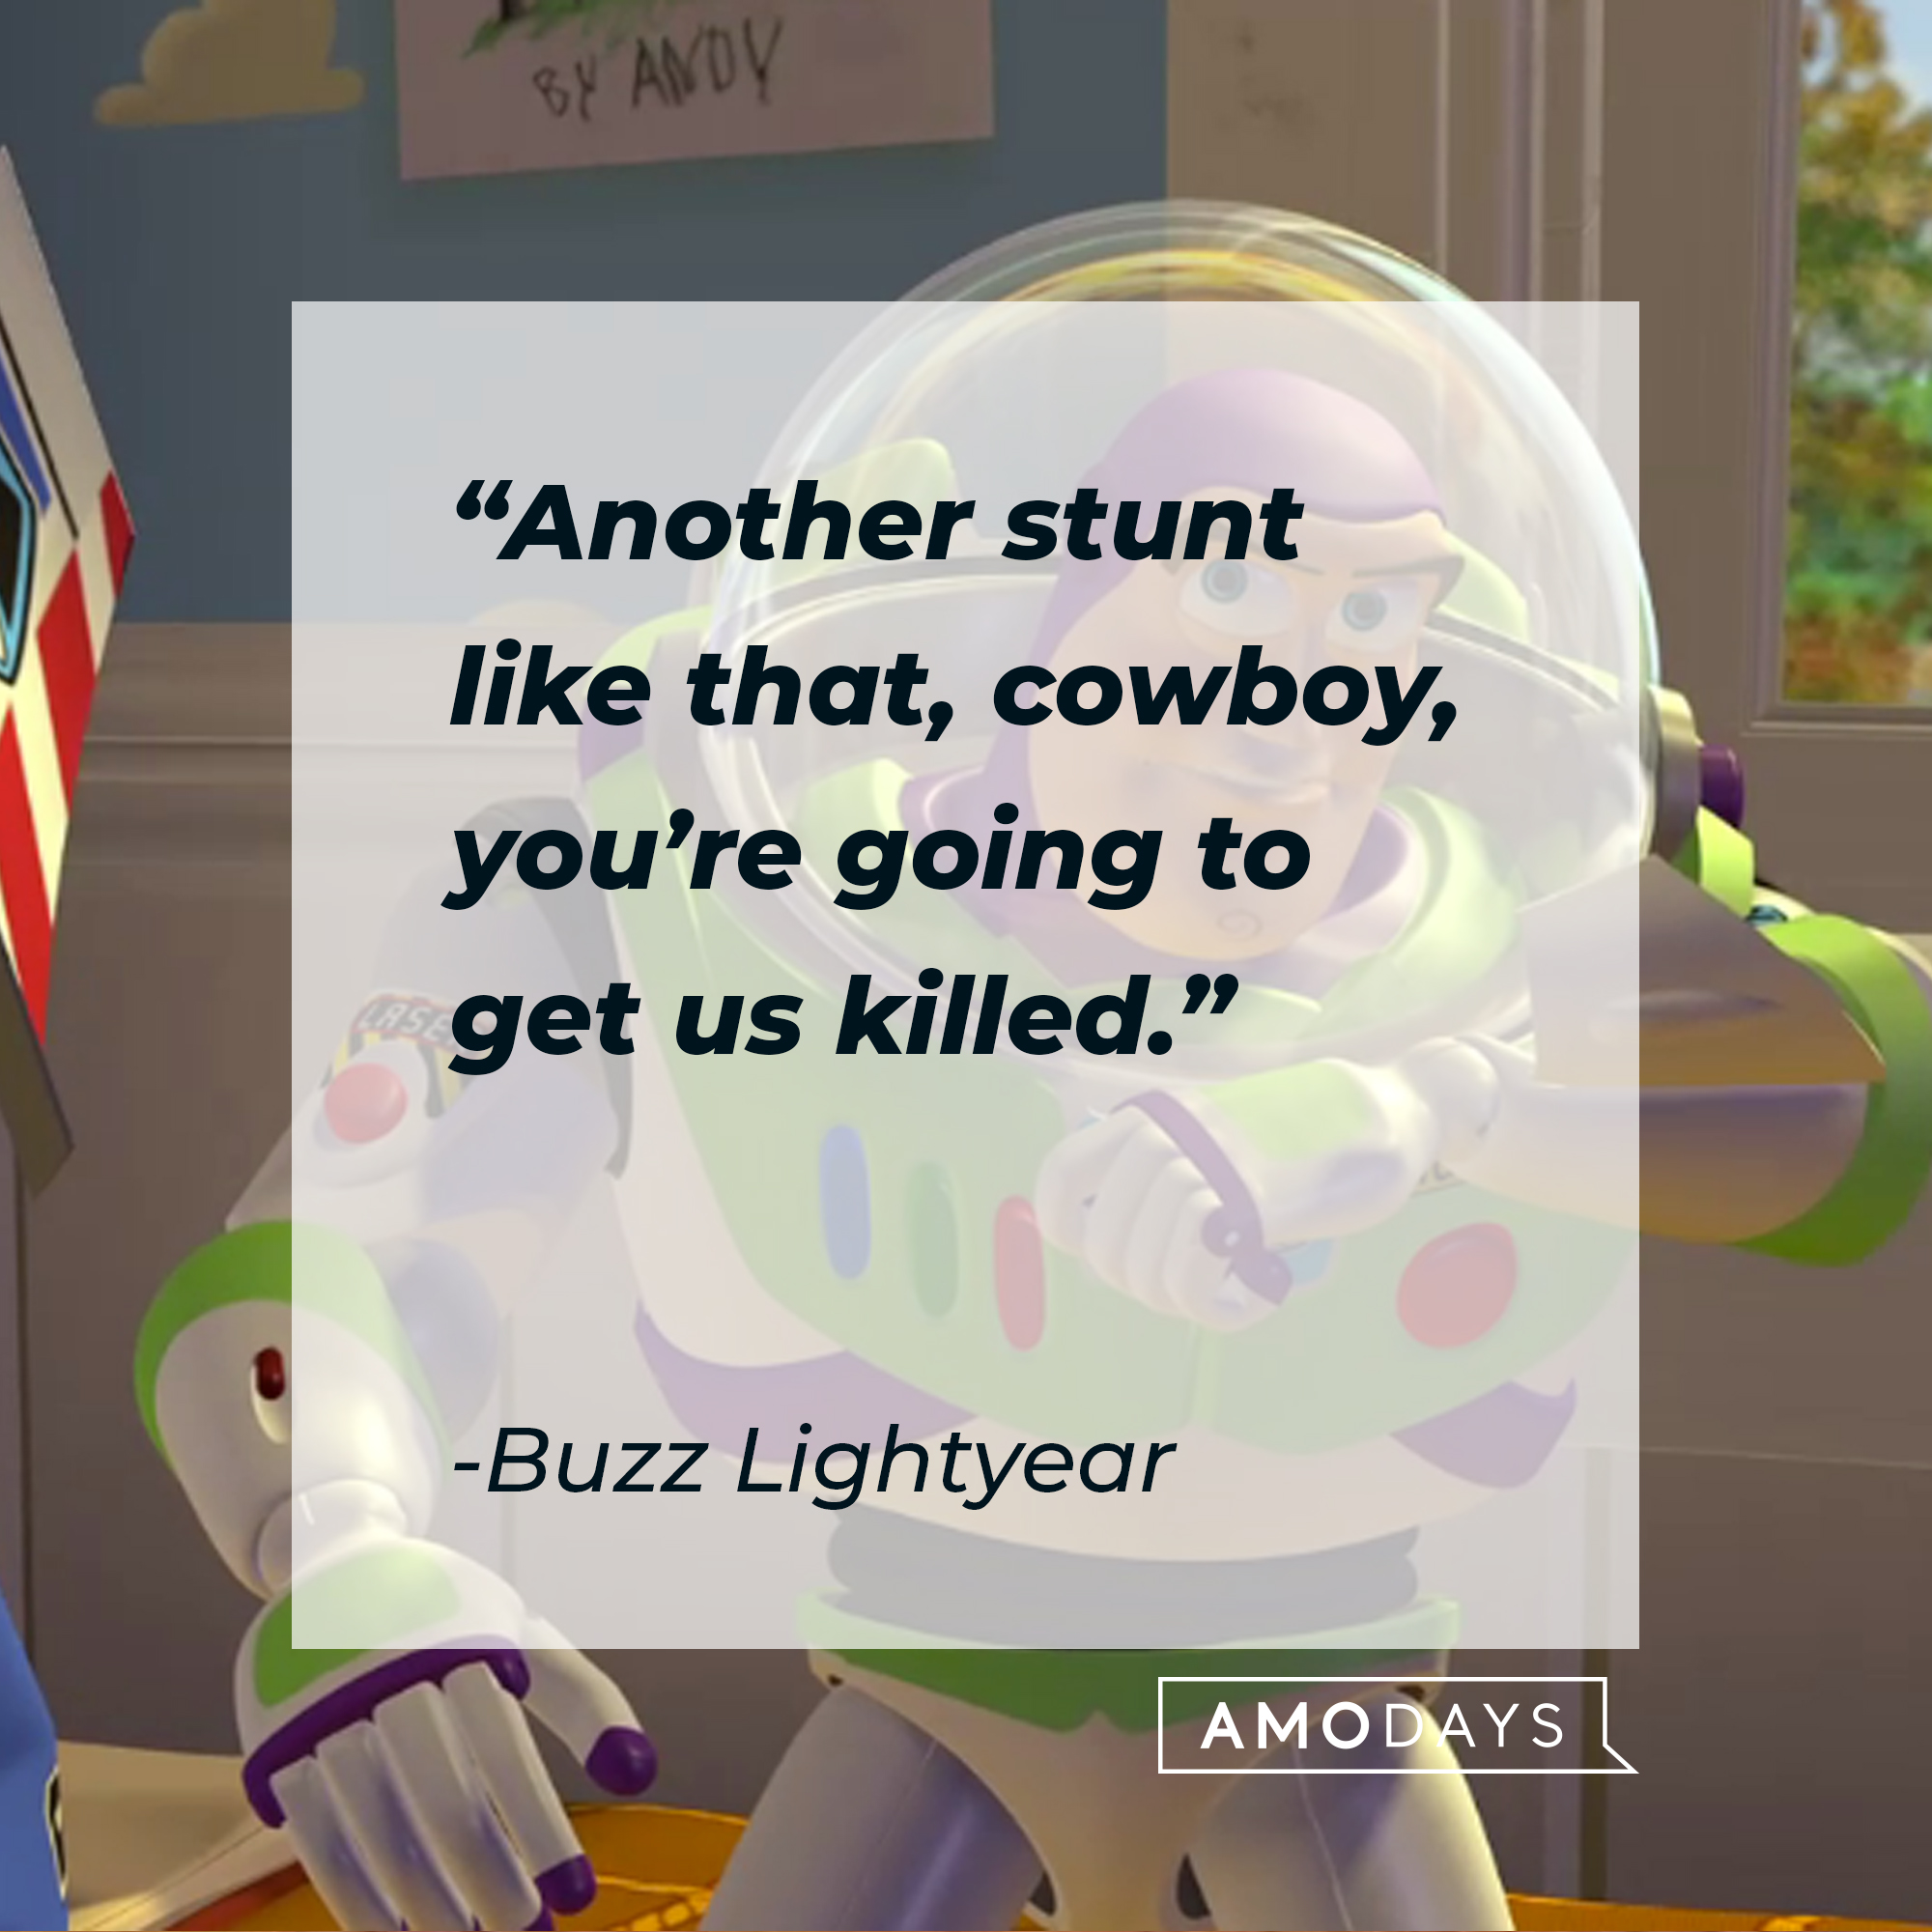 Buzz Lightyear's quote: "Another stunt like that, cowboy, you’re going to get us killed." | Source: Facebook/BuzzLightyear